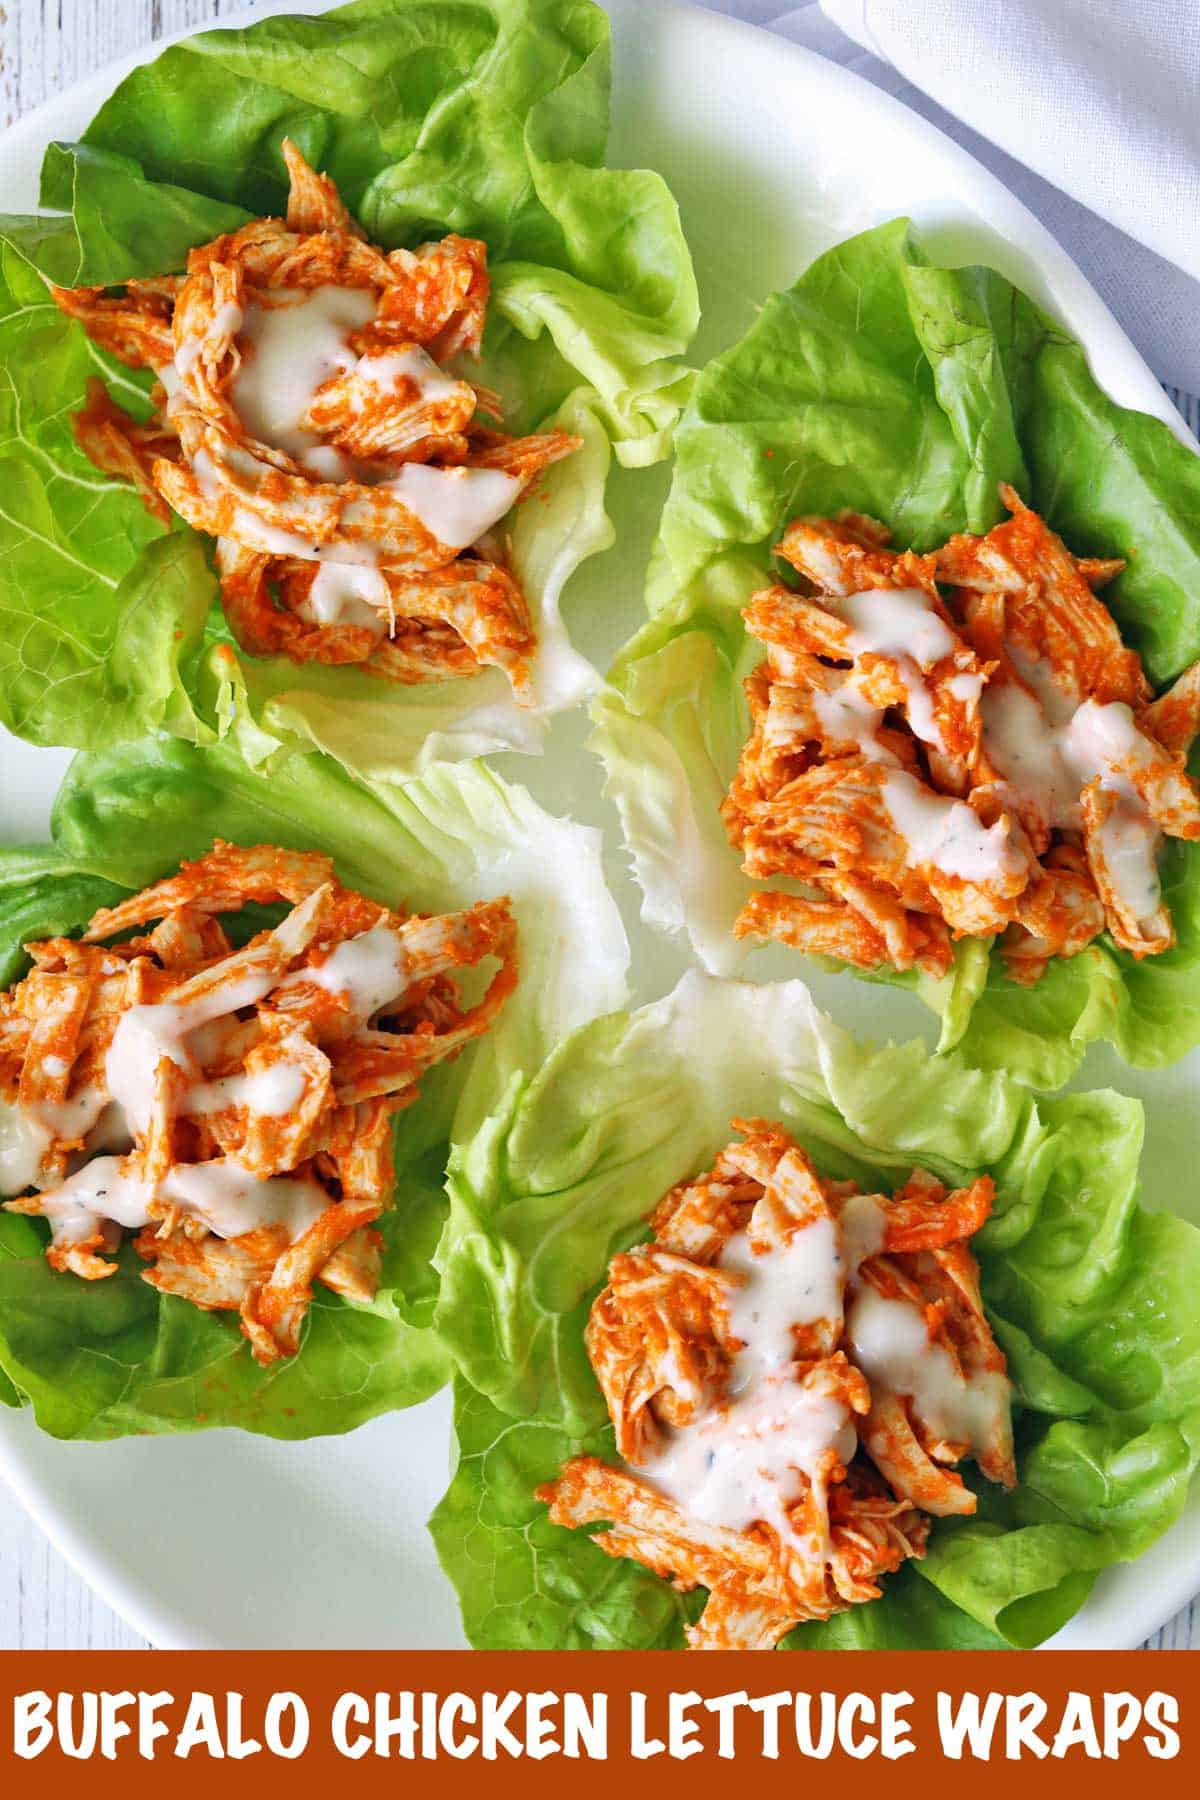 Buffalo chicken lettuce wraps served on a plate.